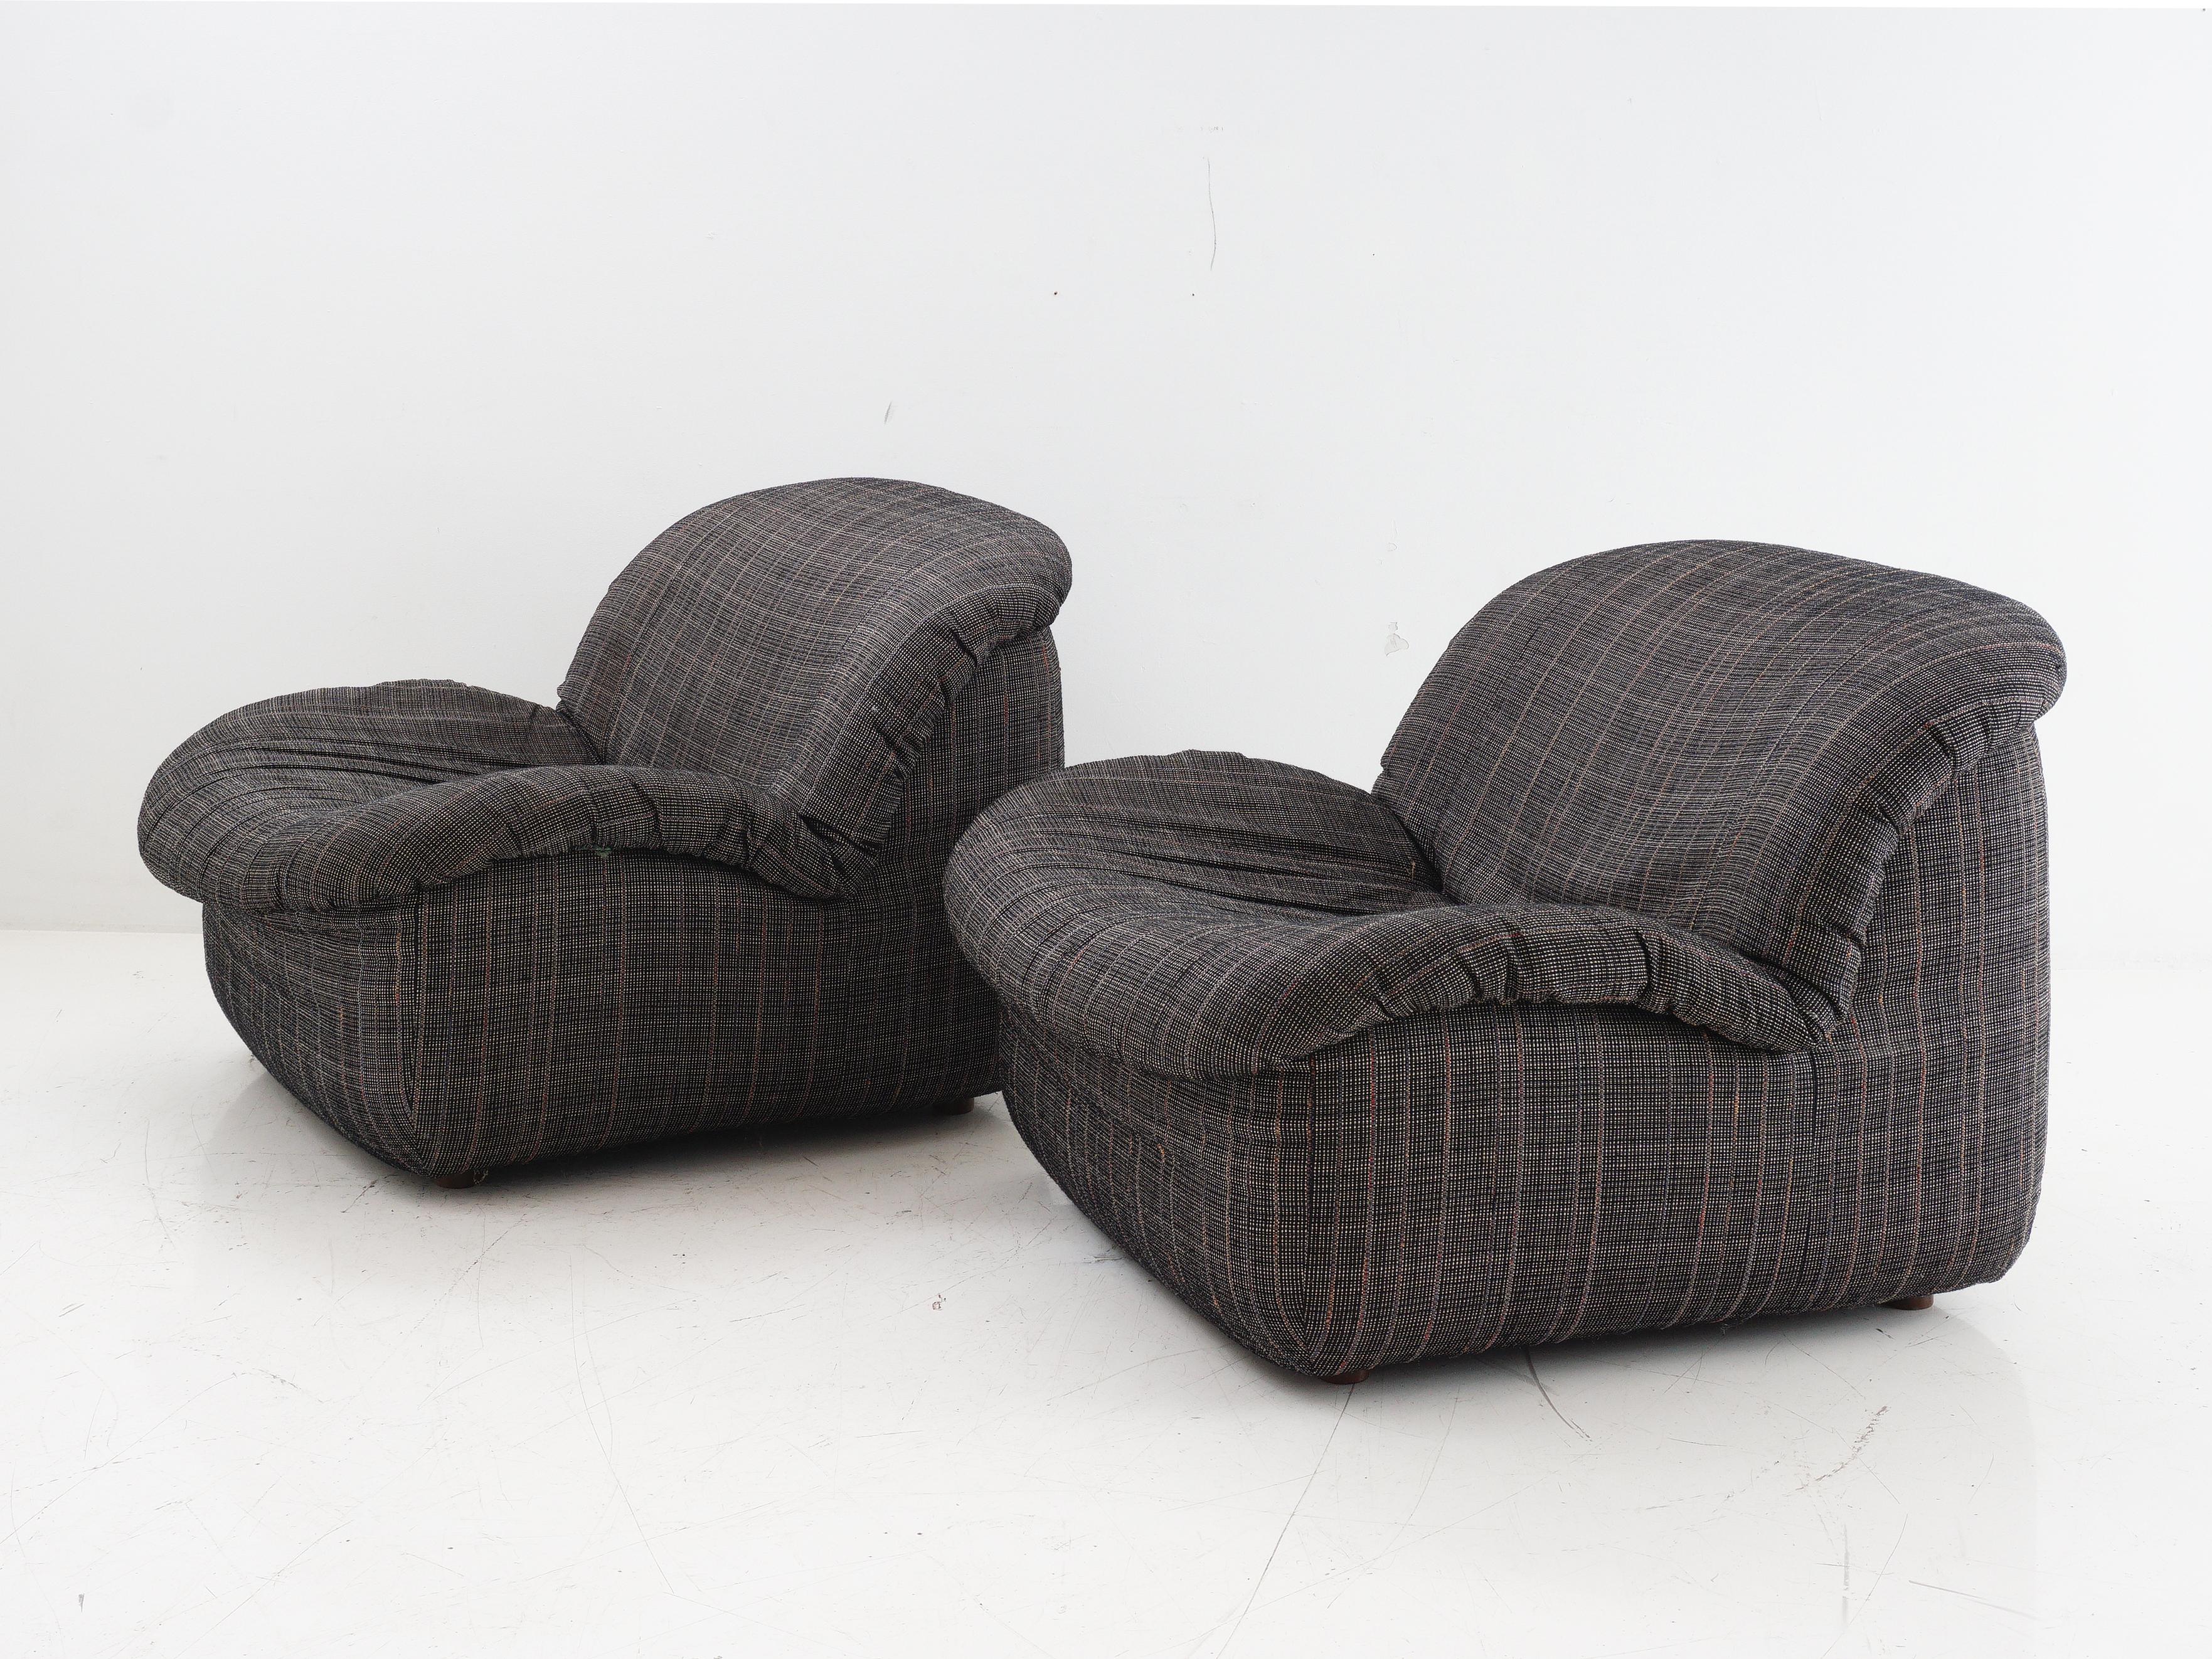 Step into the ultimate comfort zone with these tweed lounge chairs. With a pattern that  rivals your grandma's power suit, these chairs are more than just seating; they're a vintage hug for your living room. Embrace the charm, darling; your living